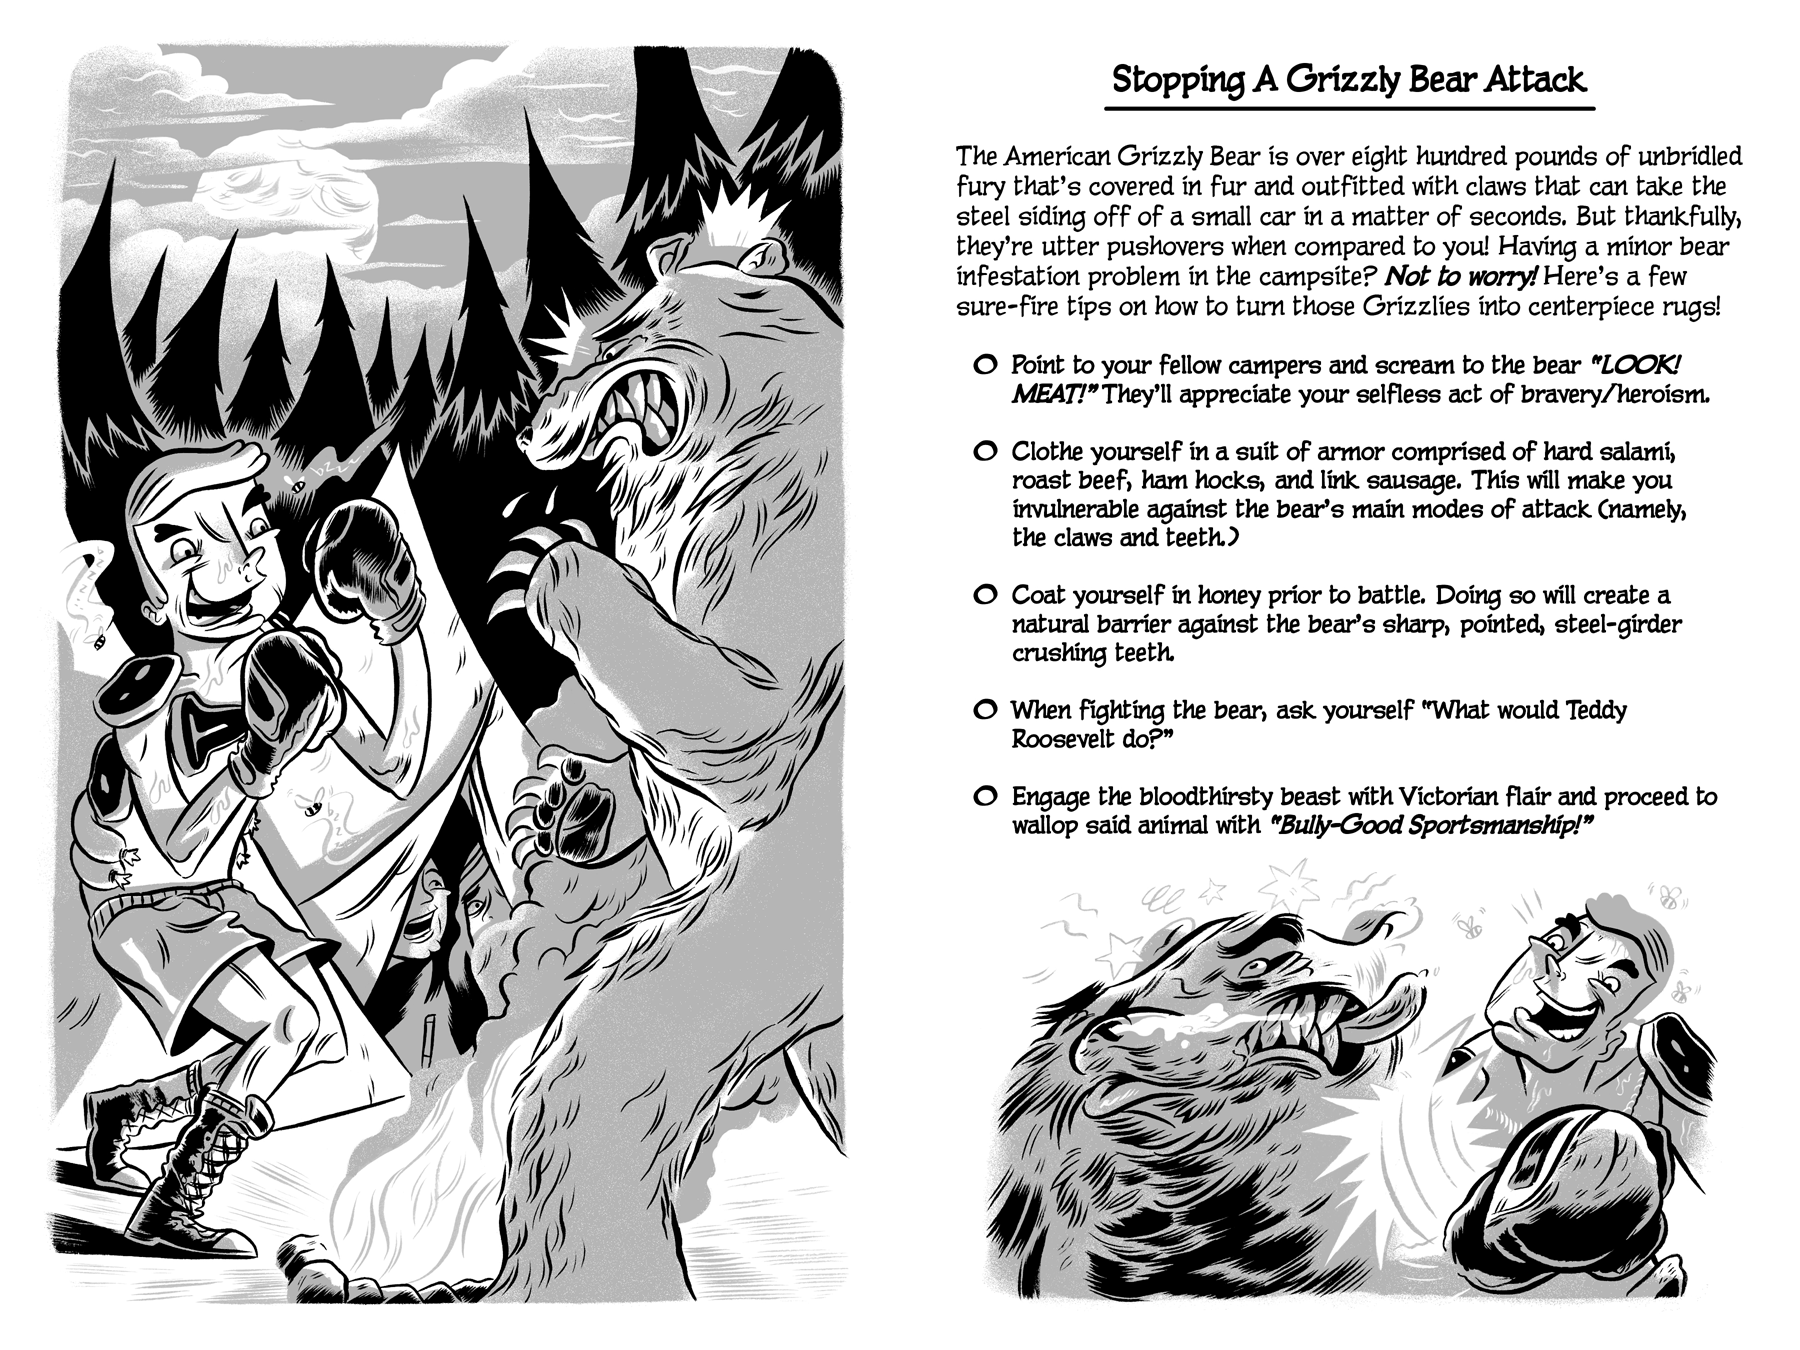 The Cartoon Guidebook To Absolute Failure - Volume 1 - Pages 6 & 7